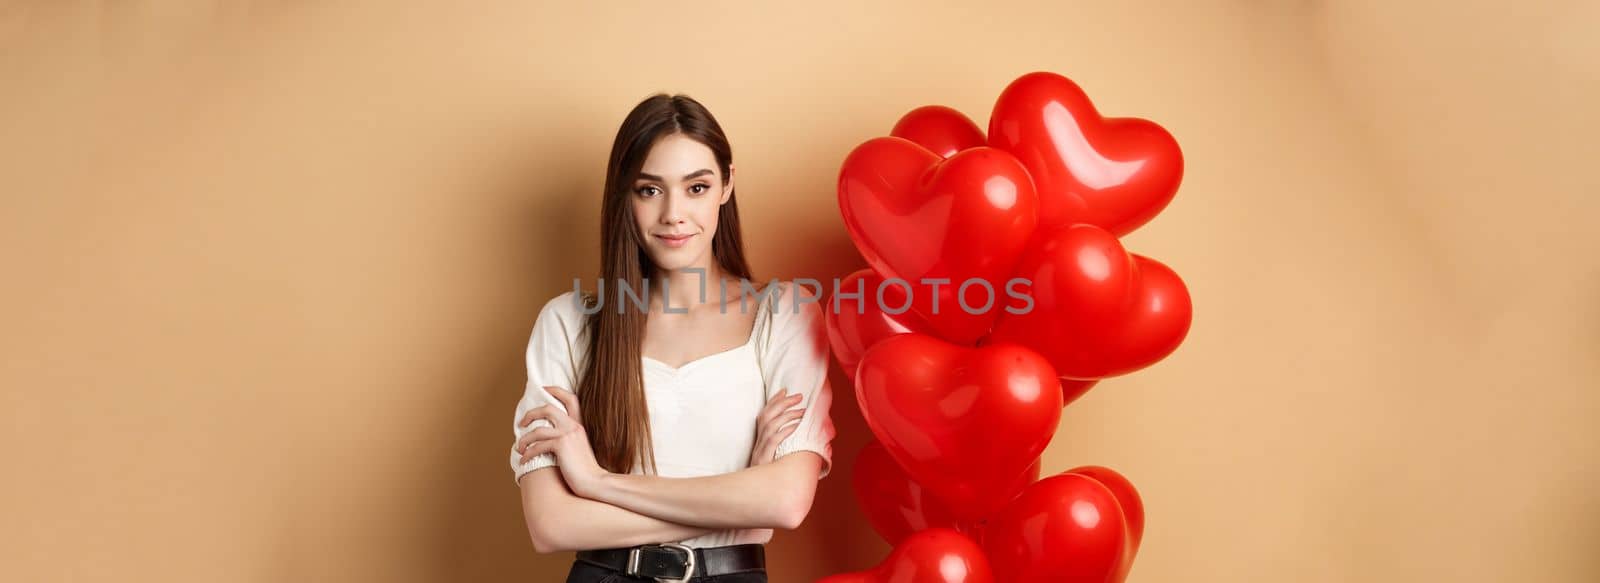 Sassy young girl cross arms on chest and smiling confident, standing near Valentines day hearts balloons and looking at camera, beige background.